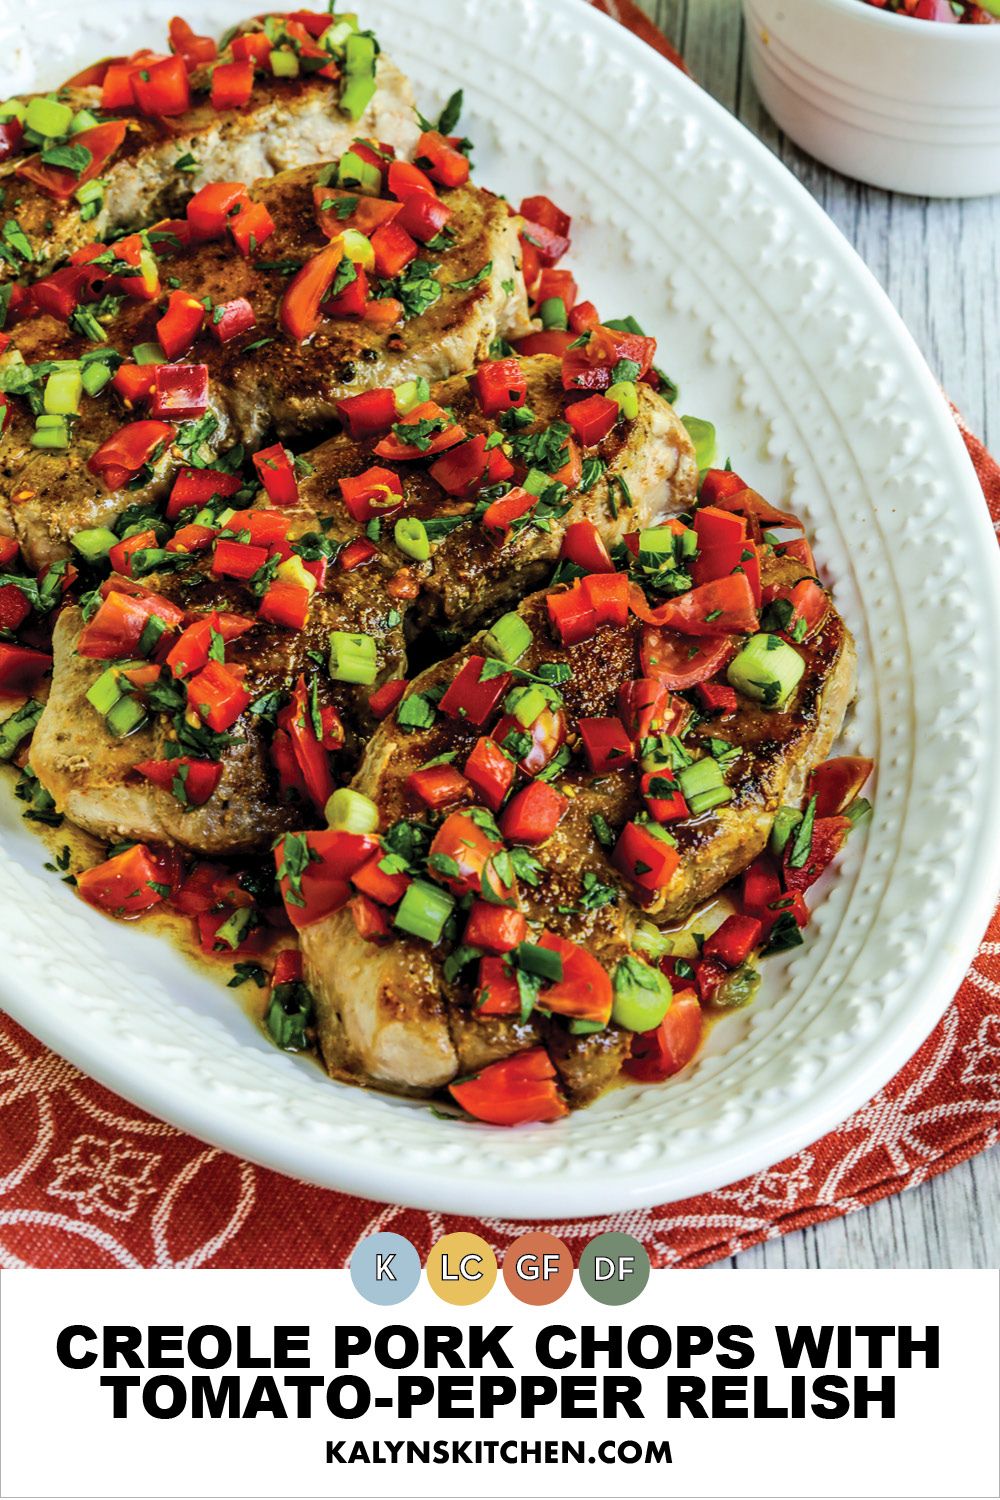 A Pinterest image of a Creole pork chop with tomato and pepper relish, with pork on a serving plate.